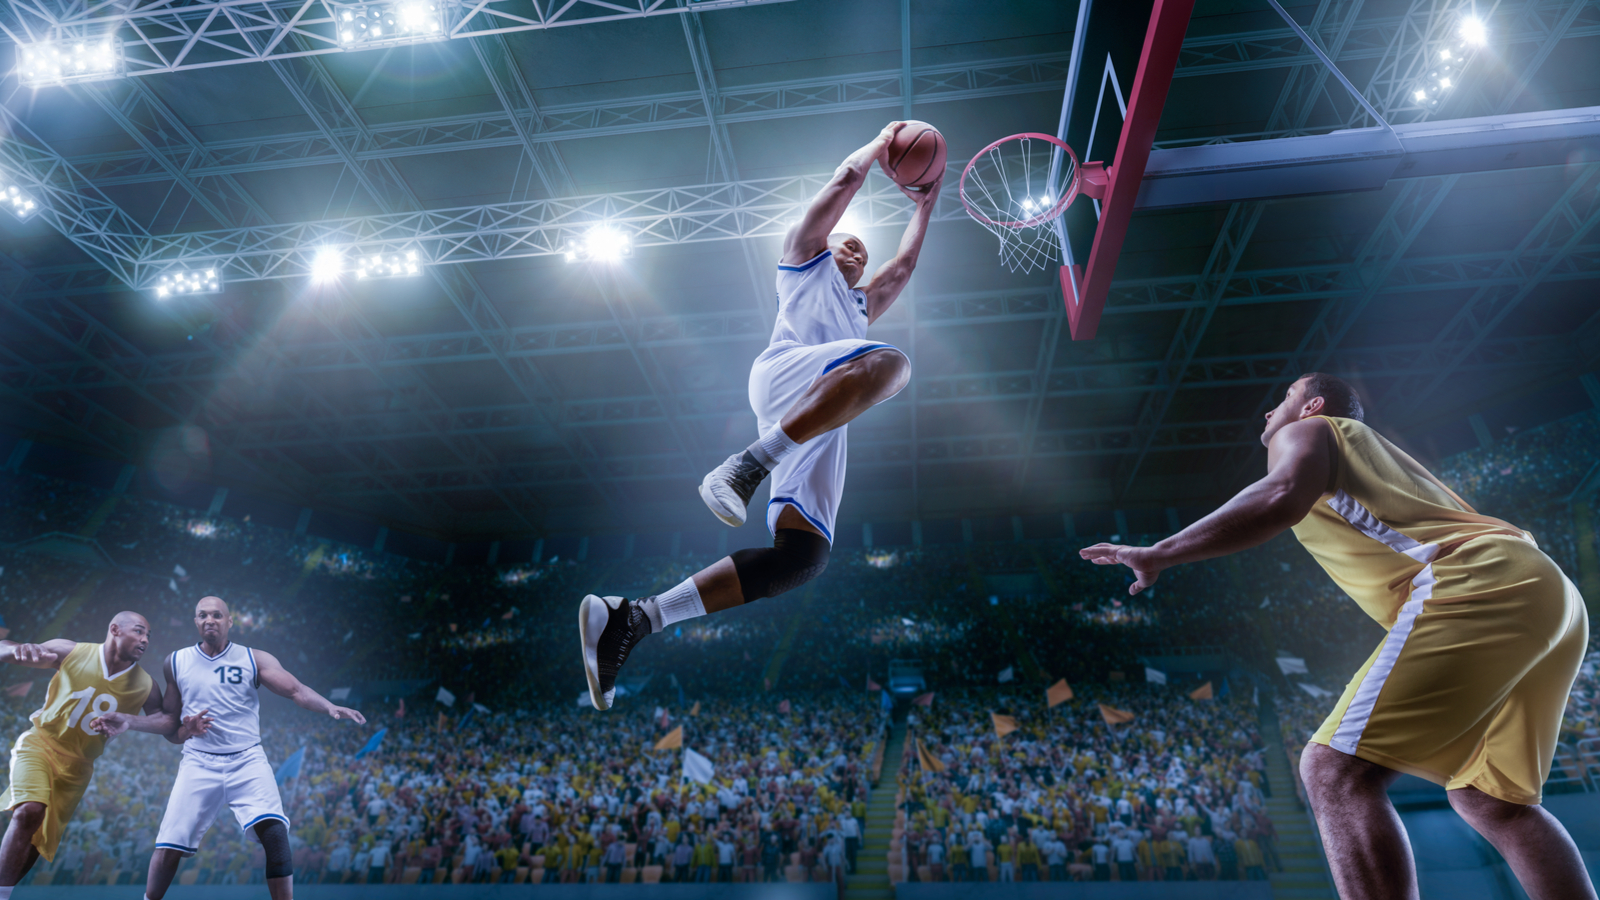 A basketball player makes a slam dunk in a crowded arena BABA Stock.